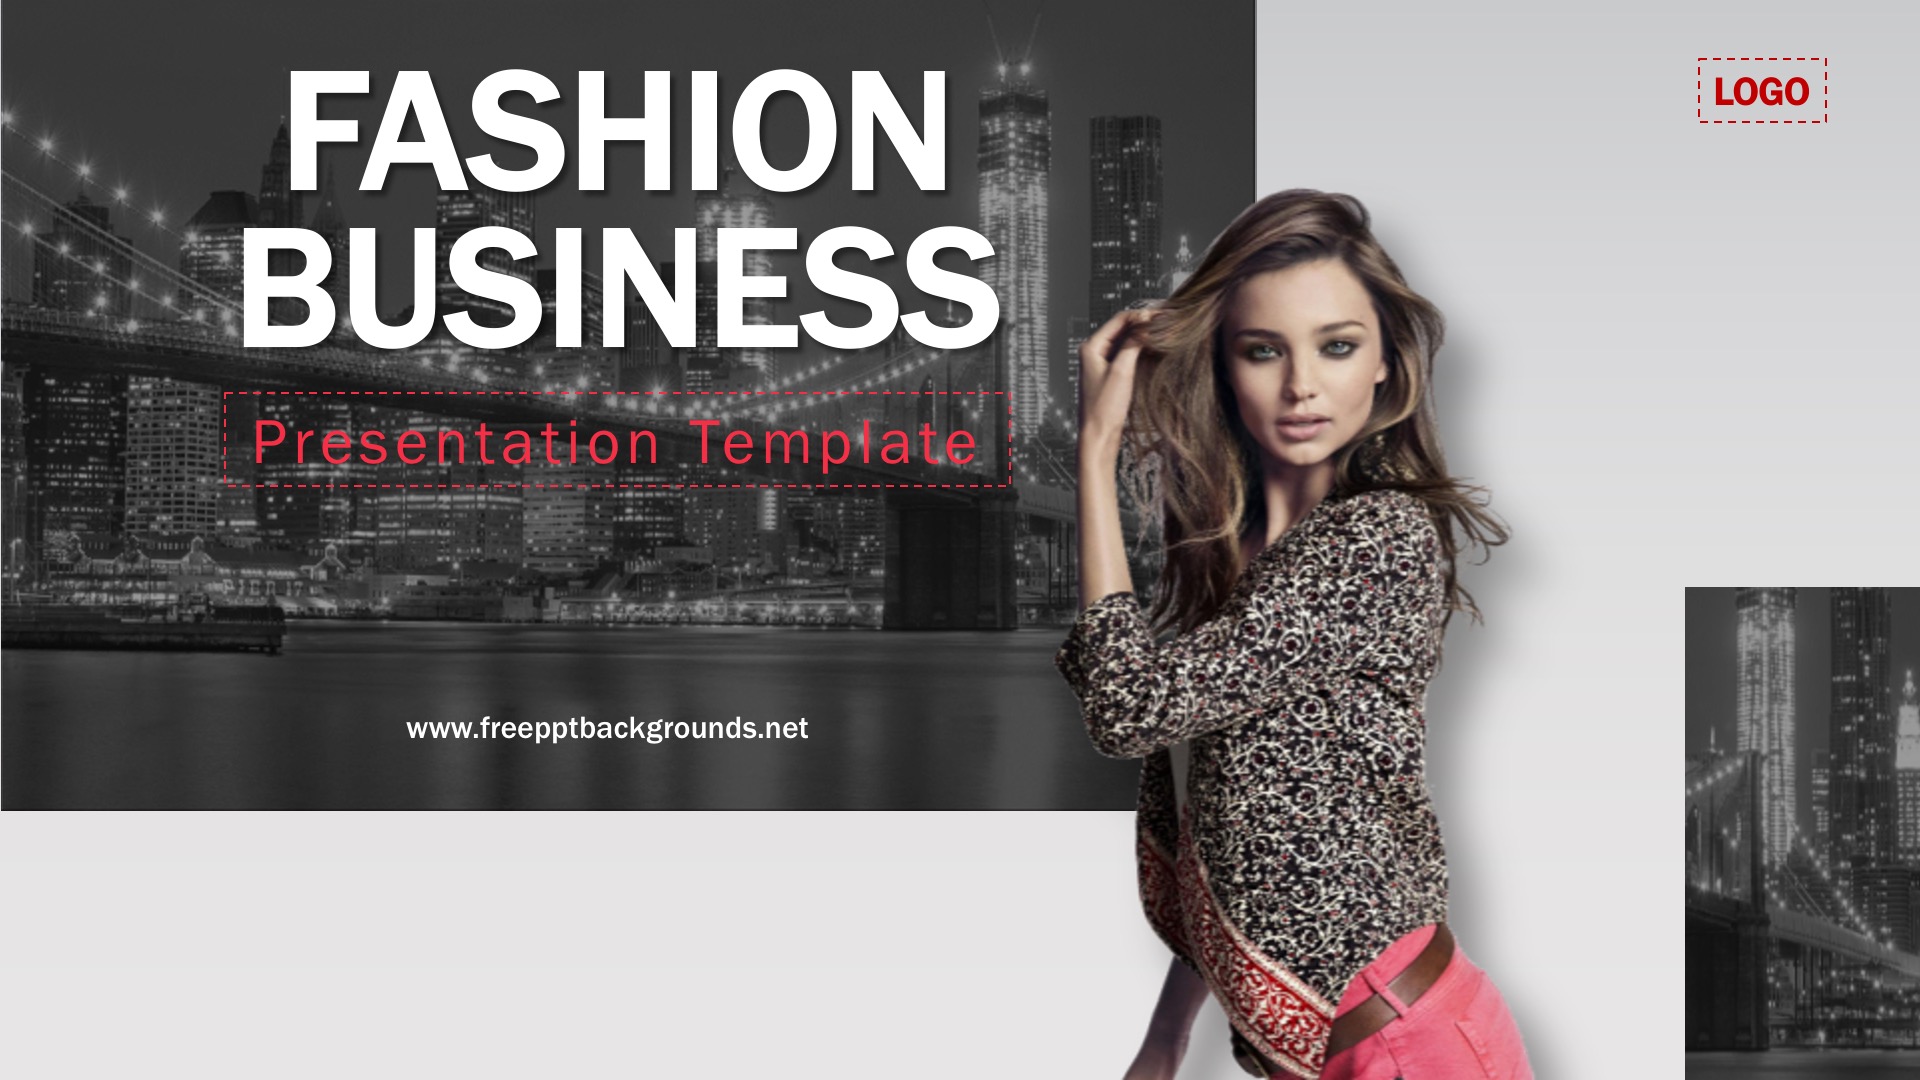 Fashion Business Powerpoint Templates - Beauty & Fashion, Objects, Silver -  Free PPT Backgrounds and Templates